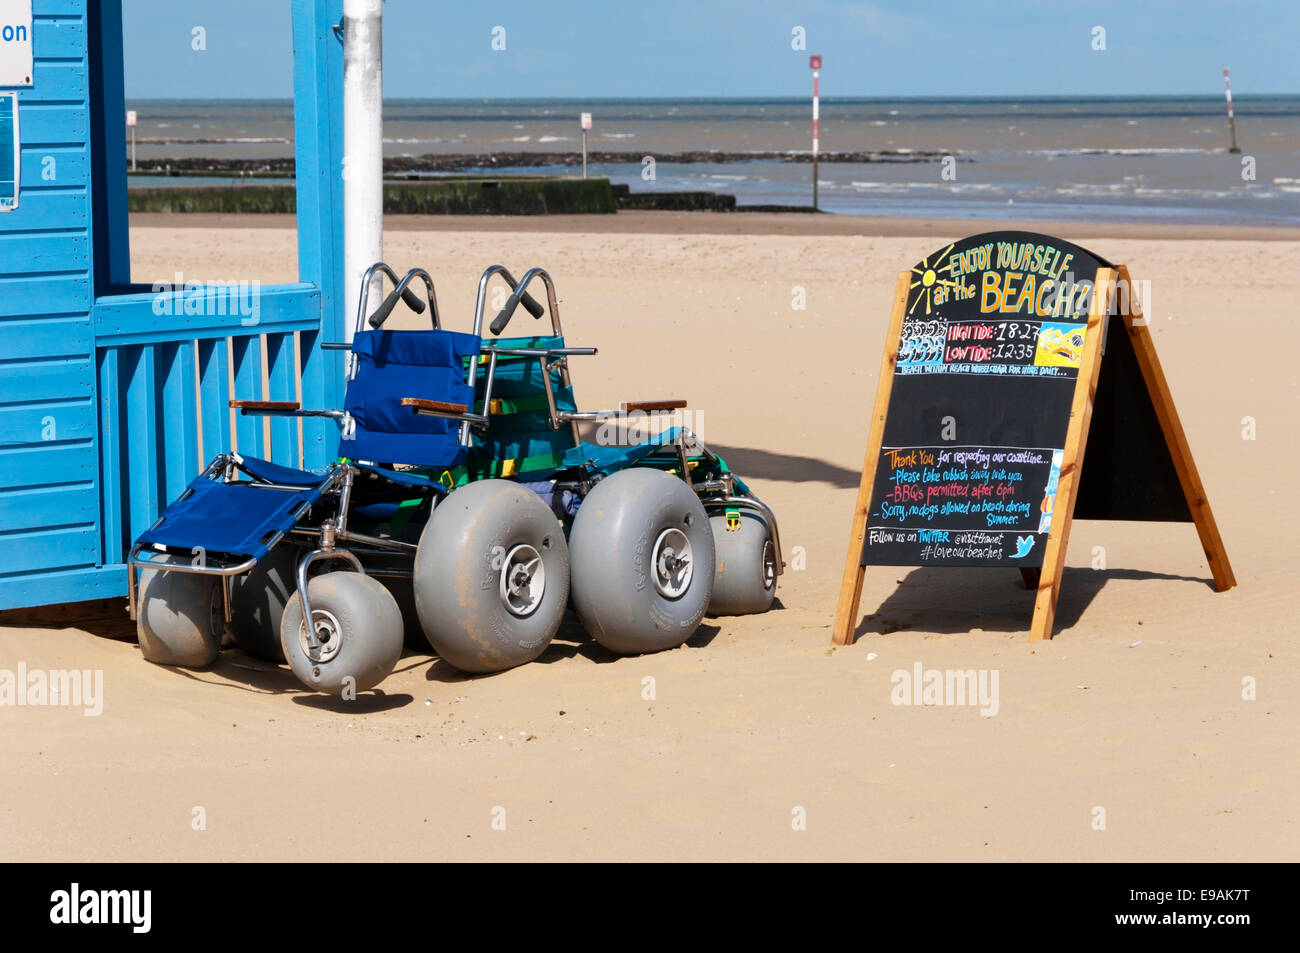 Wheelchairs for hire on Margate beach - fitted with Roleez balloon tyres for easy beach access. Stock Photo